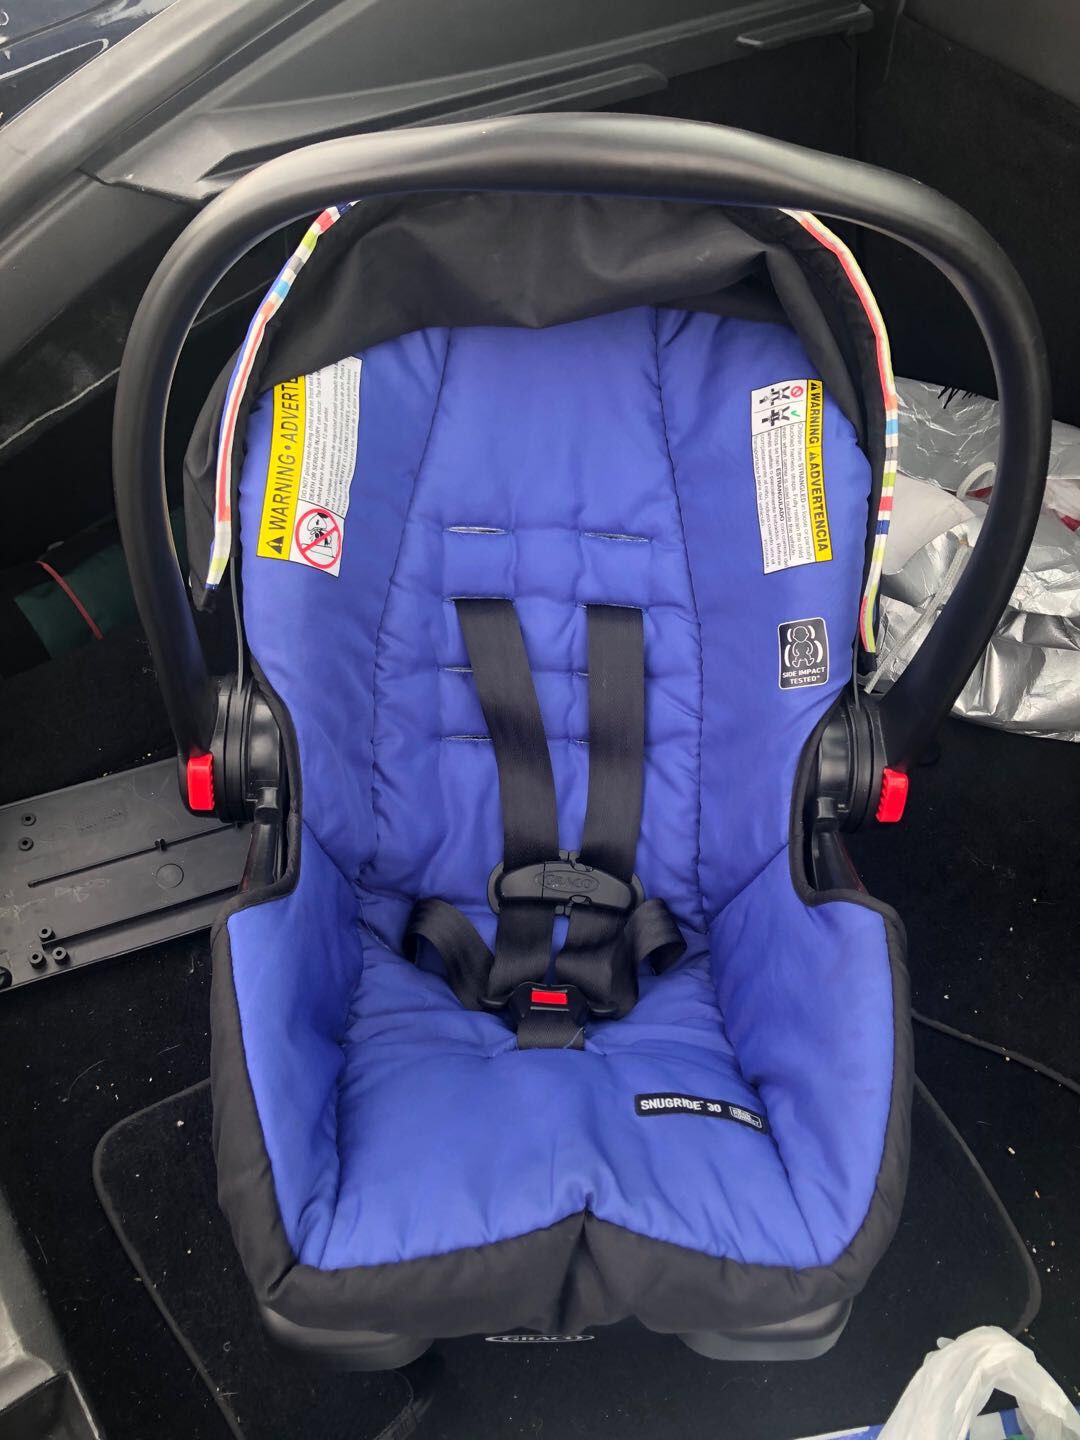 Graco infant car seat and swing